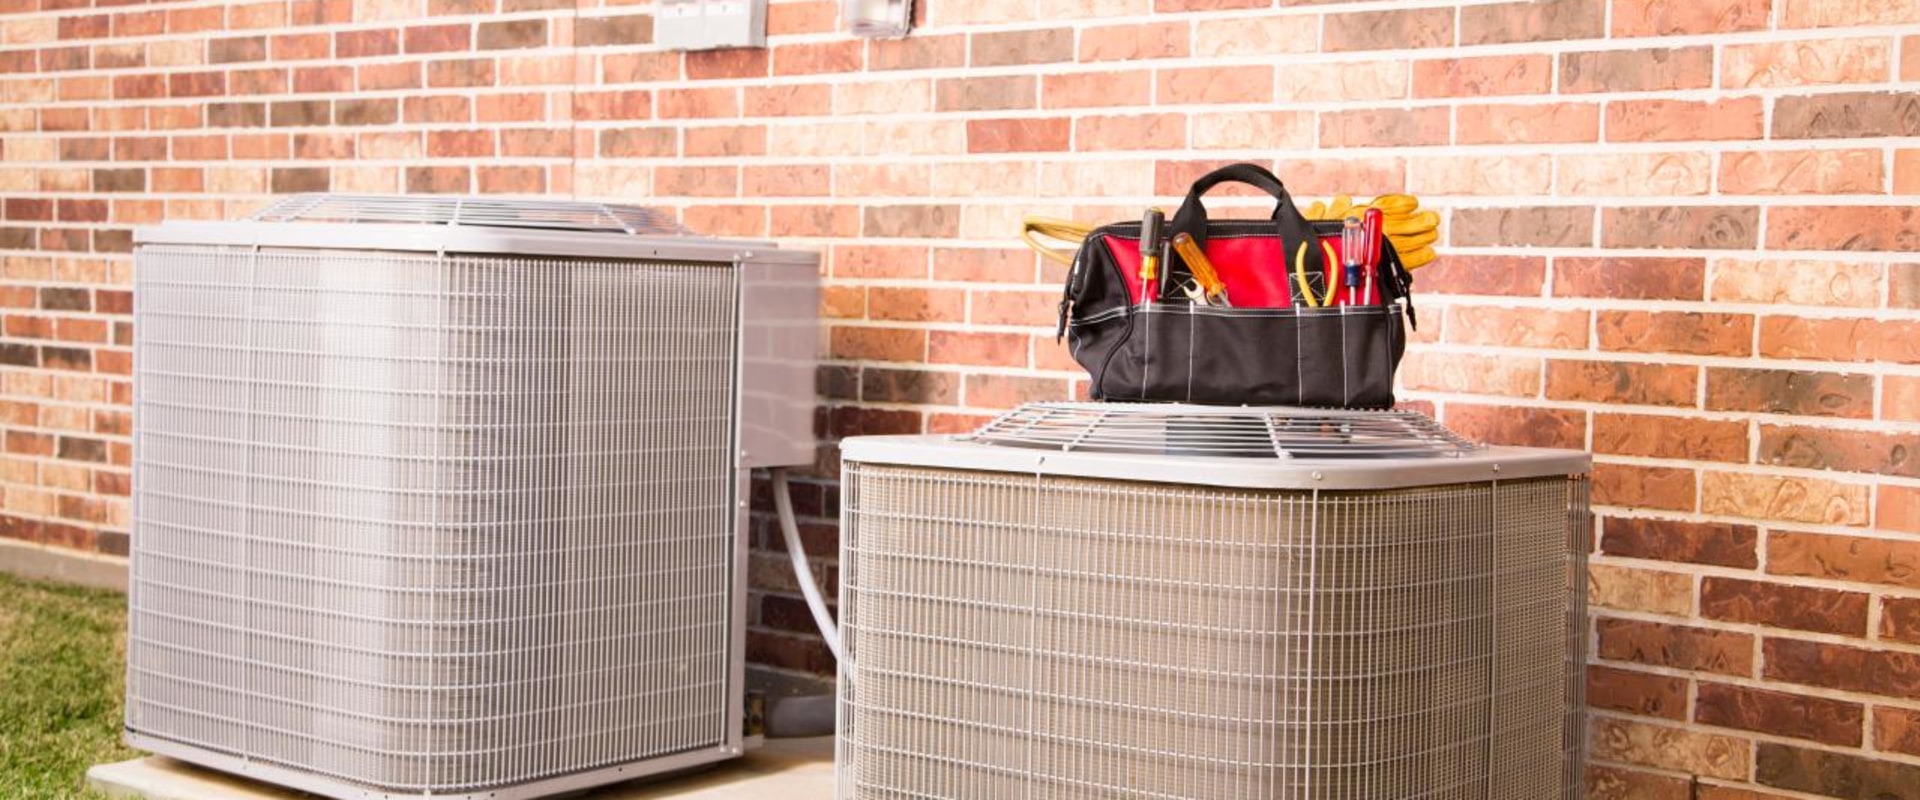 How to Keep Your HVAC System in Good Working Order